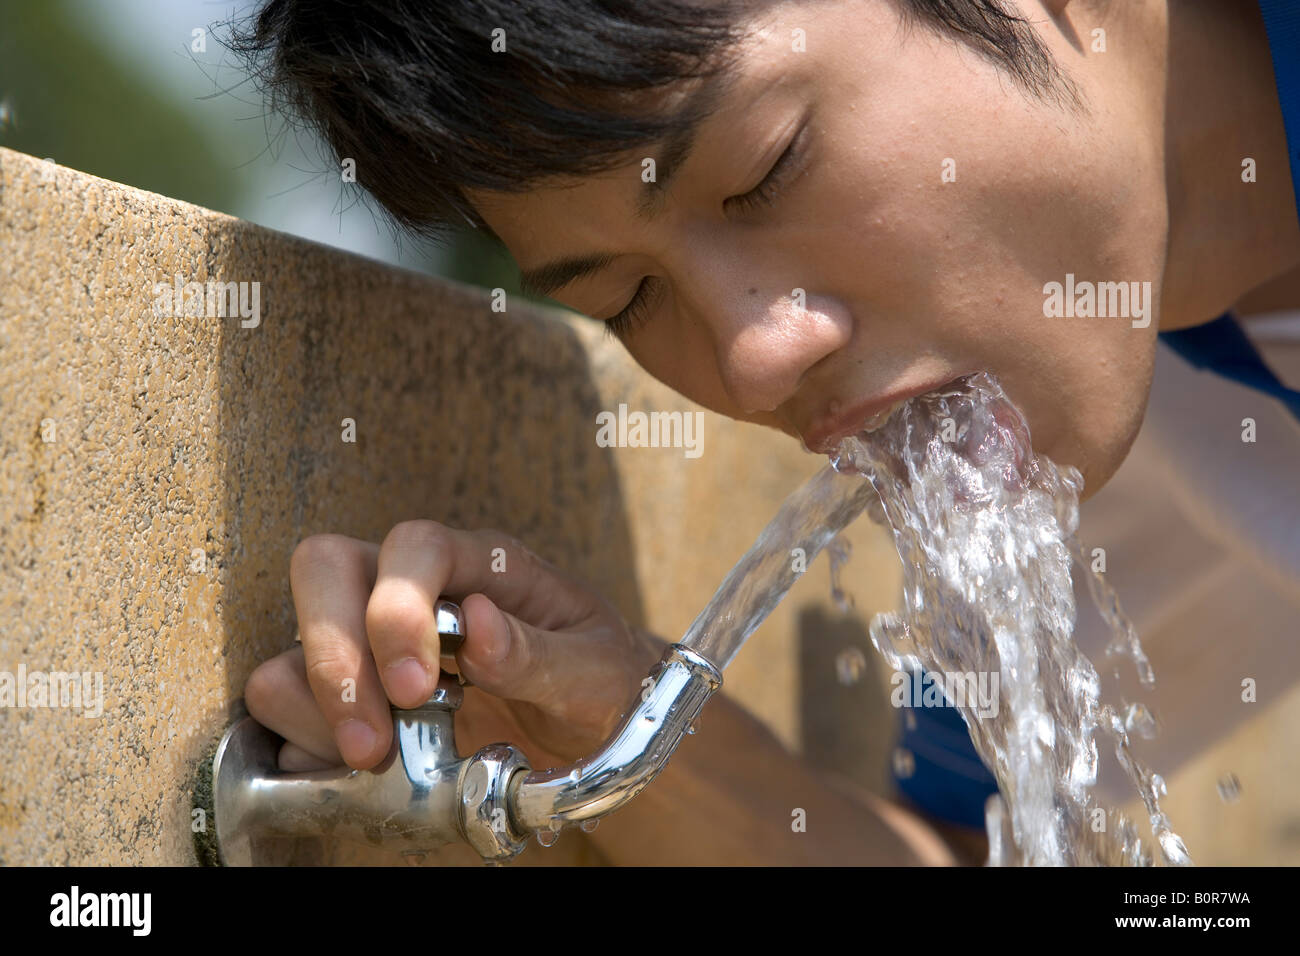 Teenage boy drinking from fontaine d'eau potable Banque D'Images